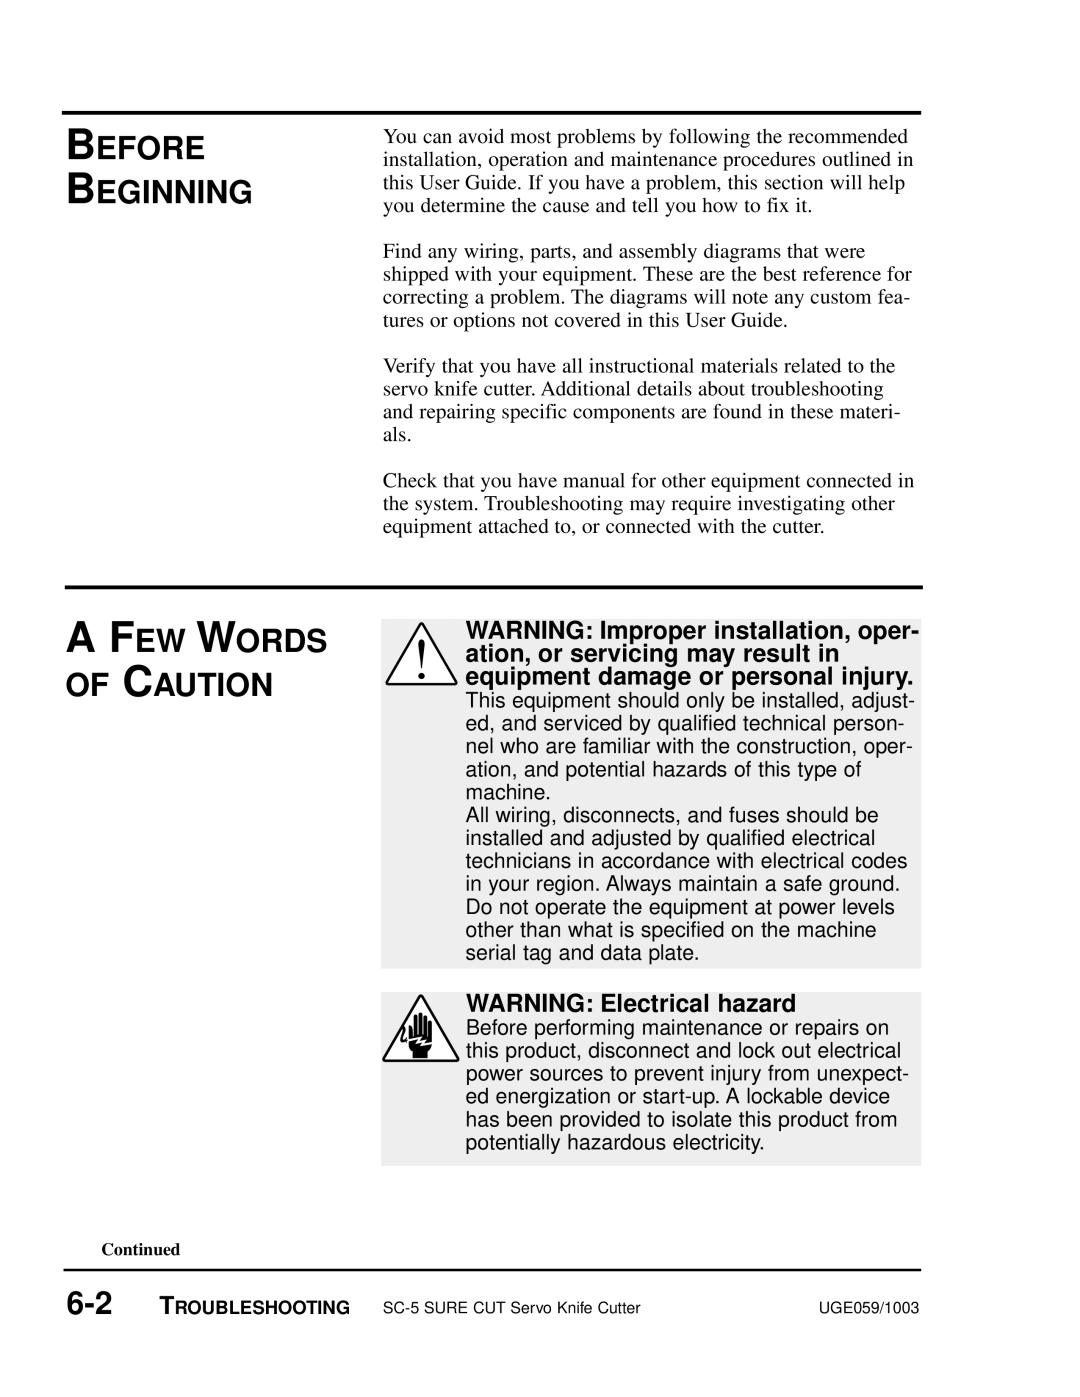 Conair SC-5 manual Before Beginning, A Few Words Of Caution, WARNING Electrical hazard 